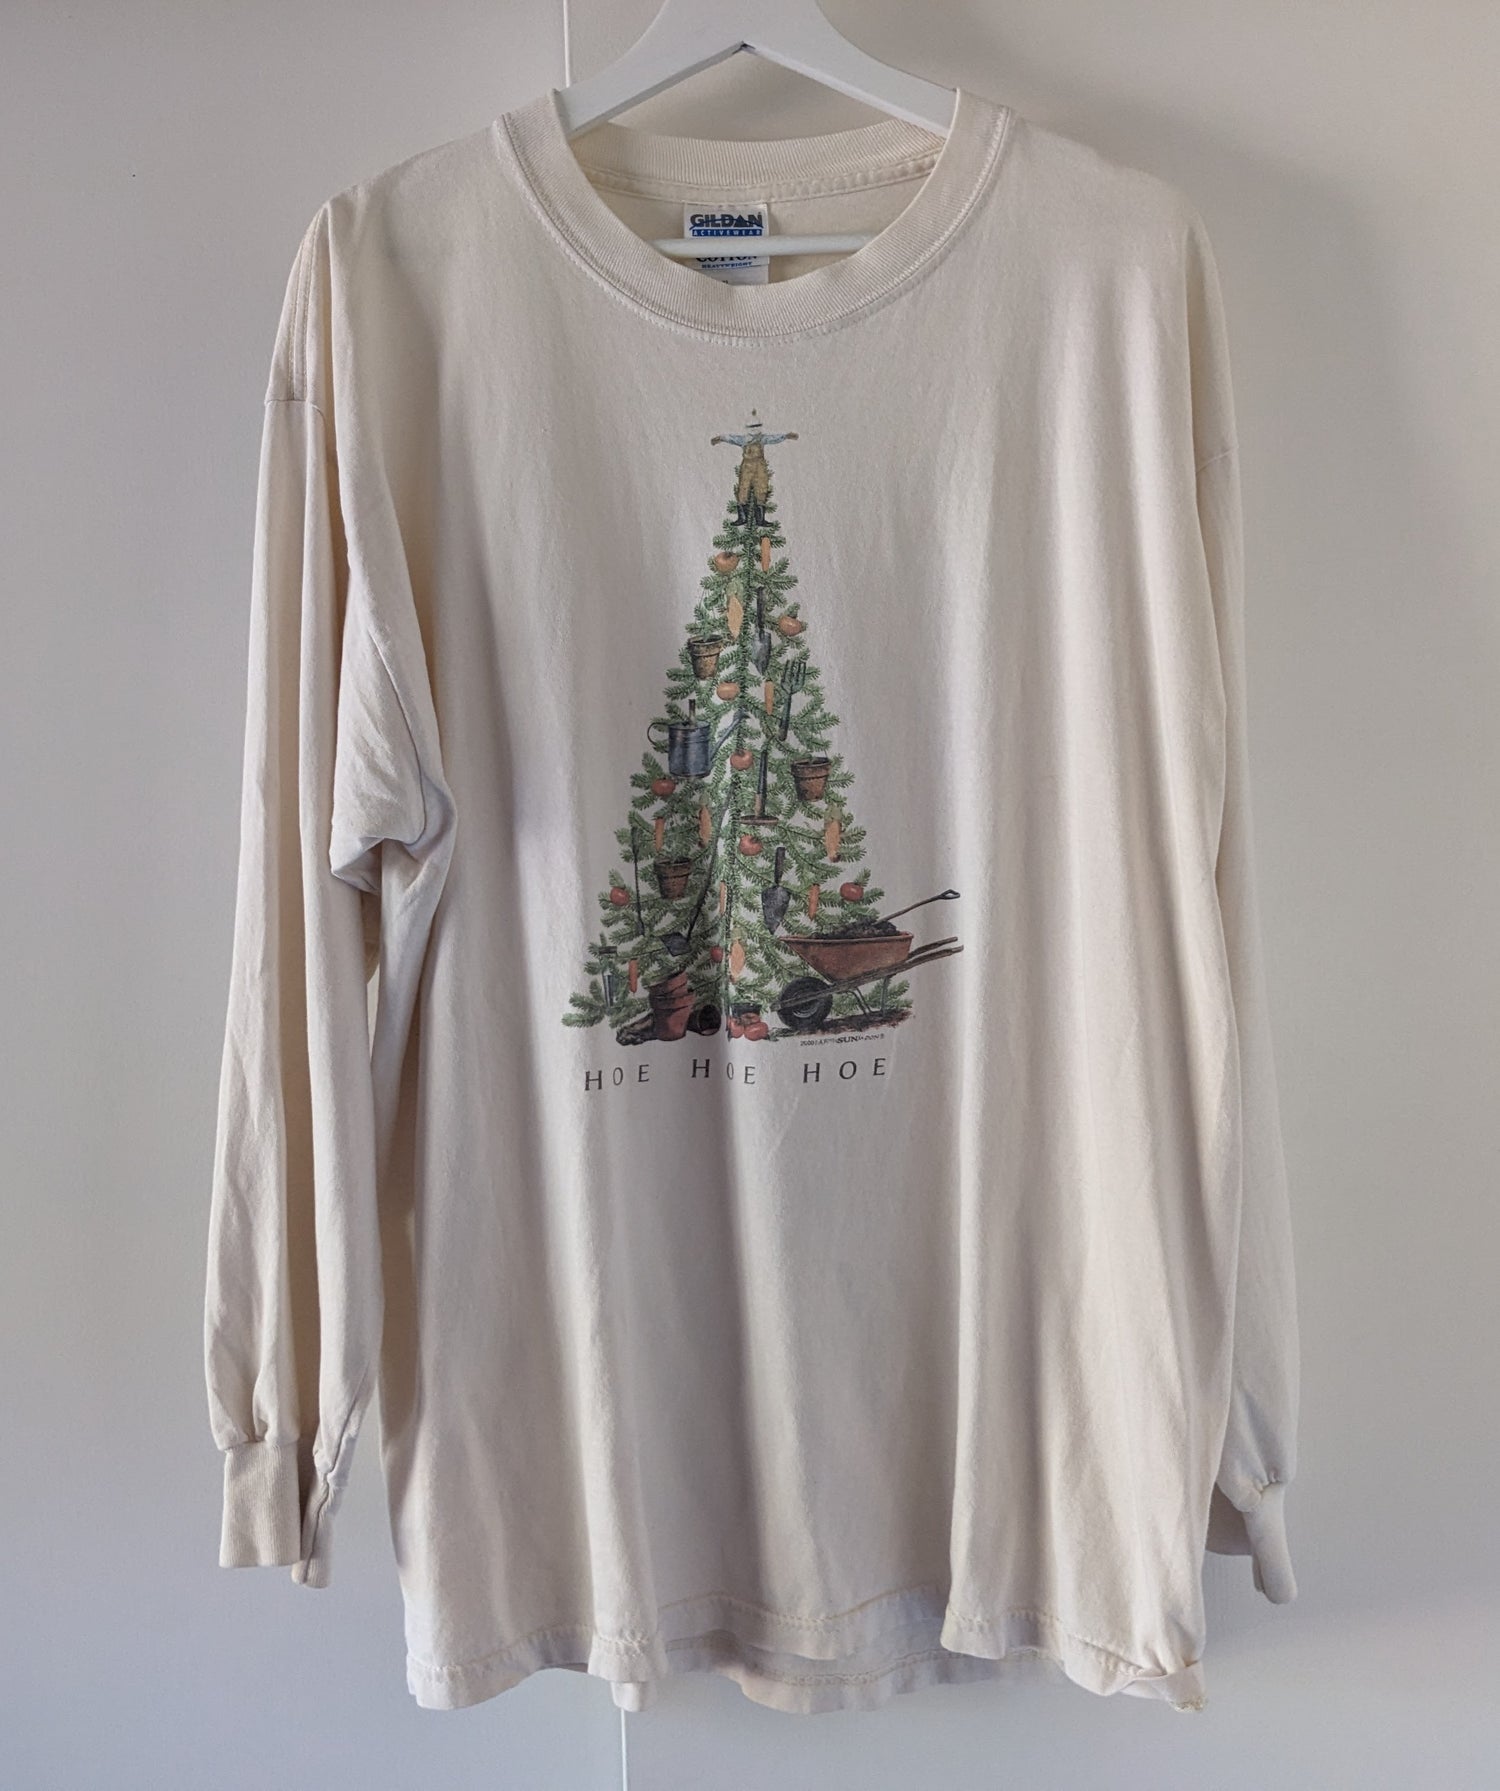 Off-white long sleeve shirt with Christmas tree with garden ornaments reading Hoe Hoe Hoe